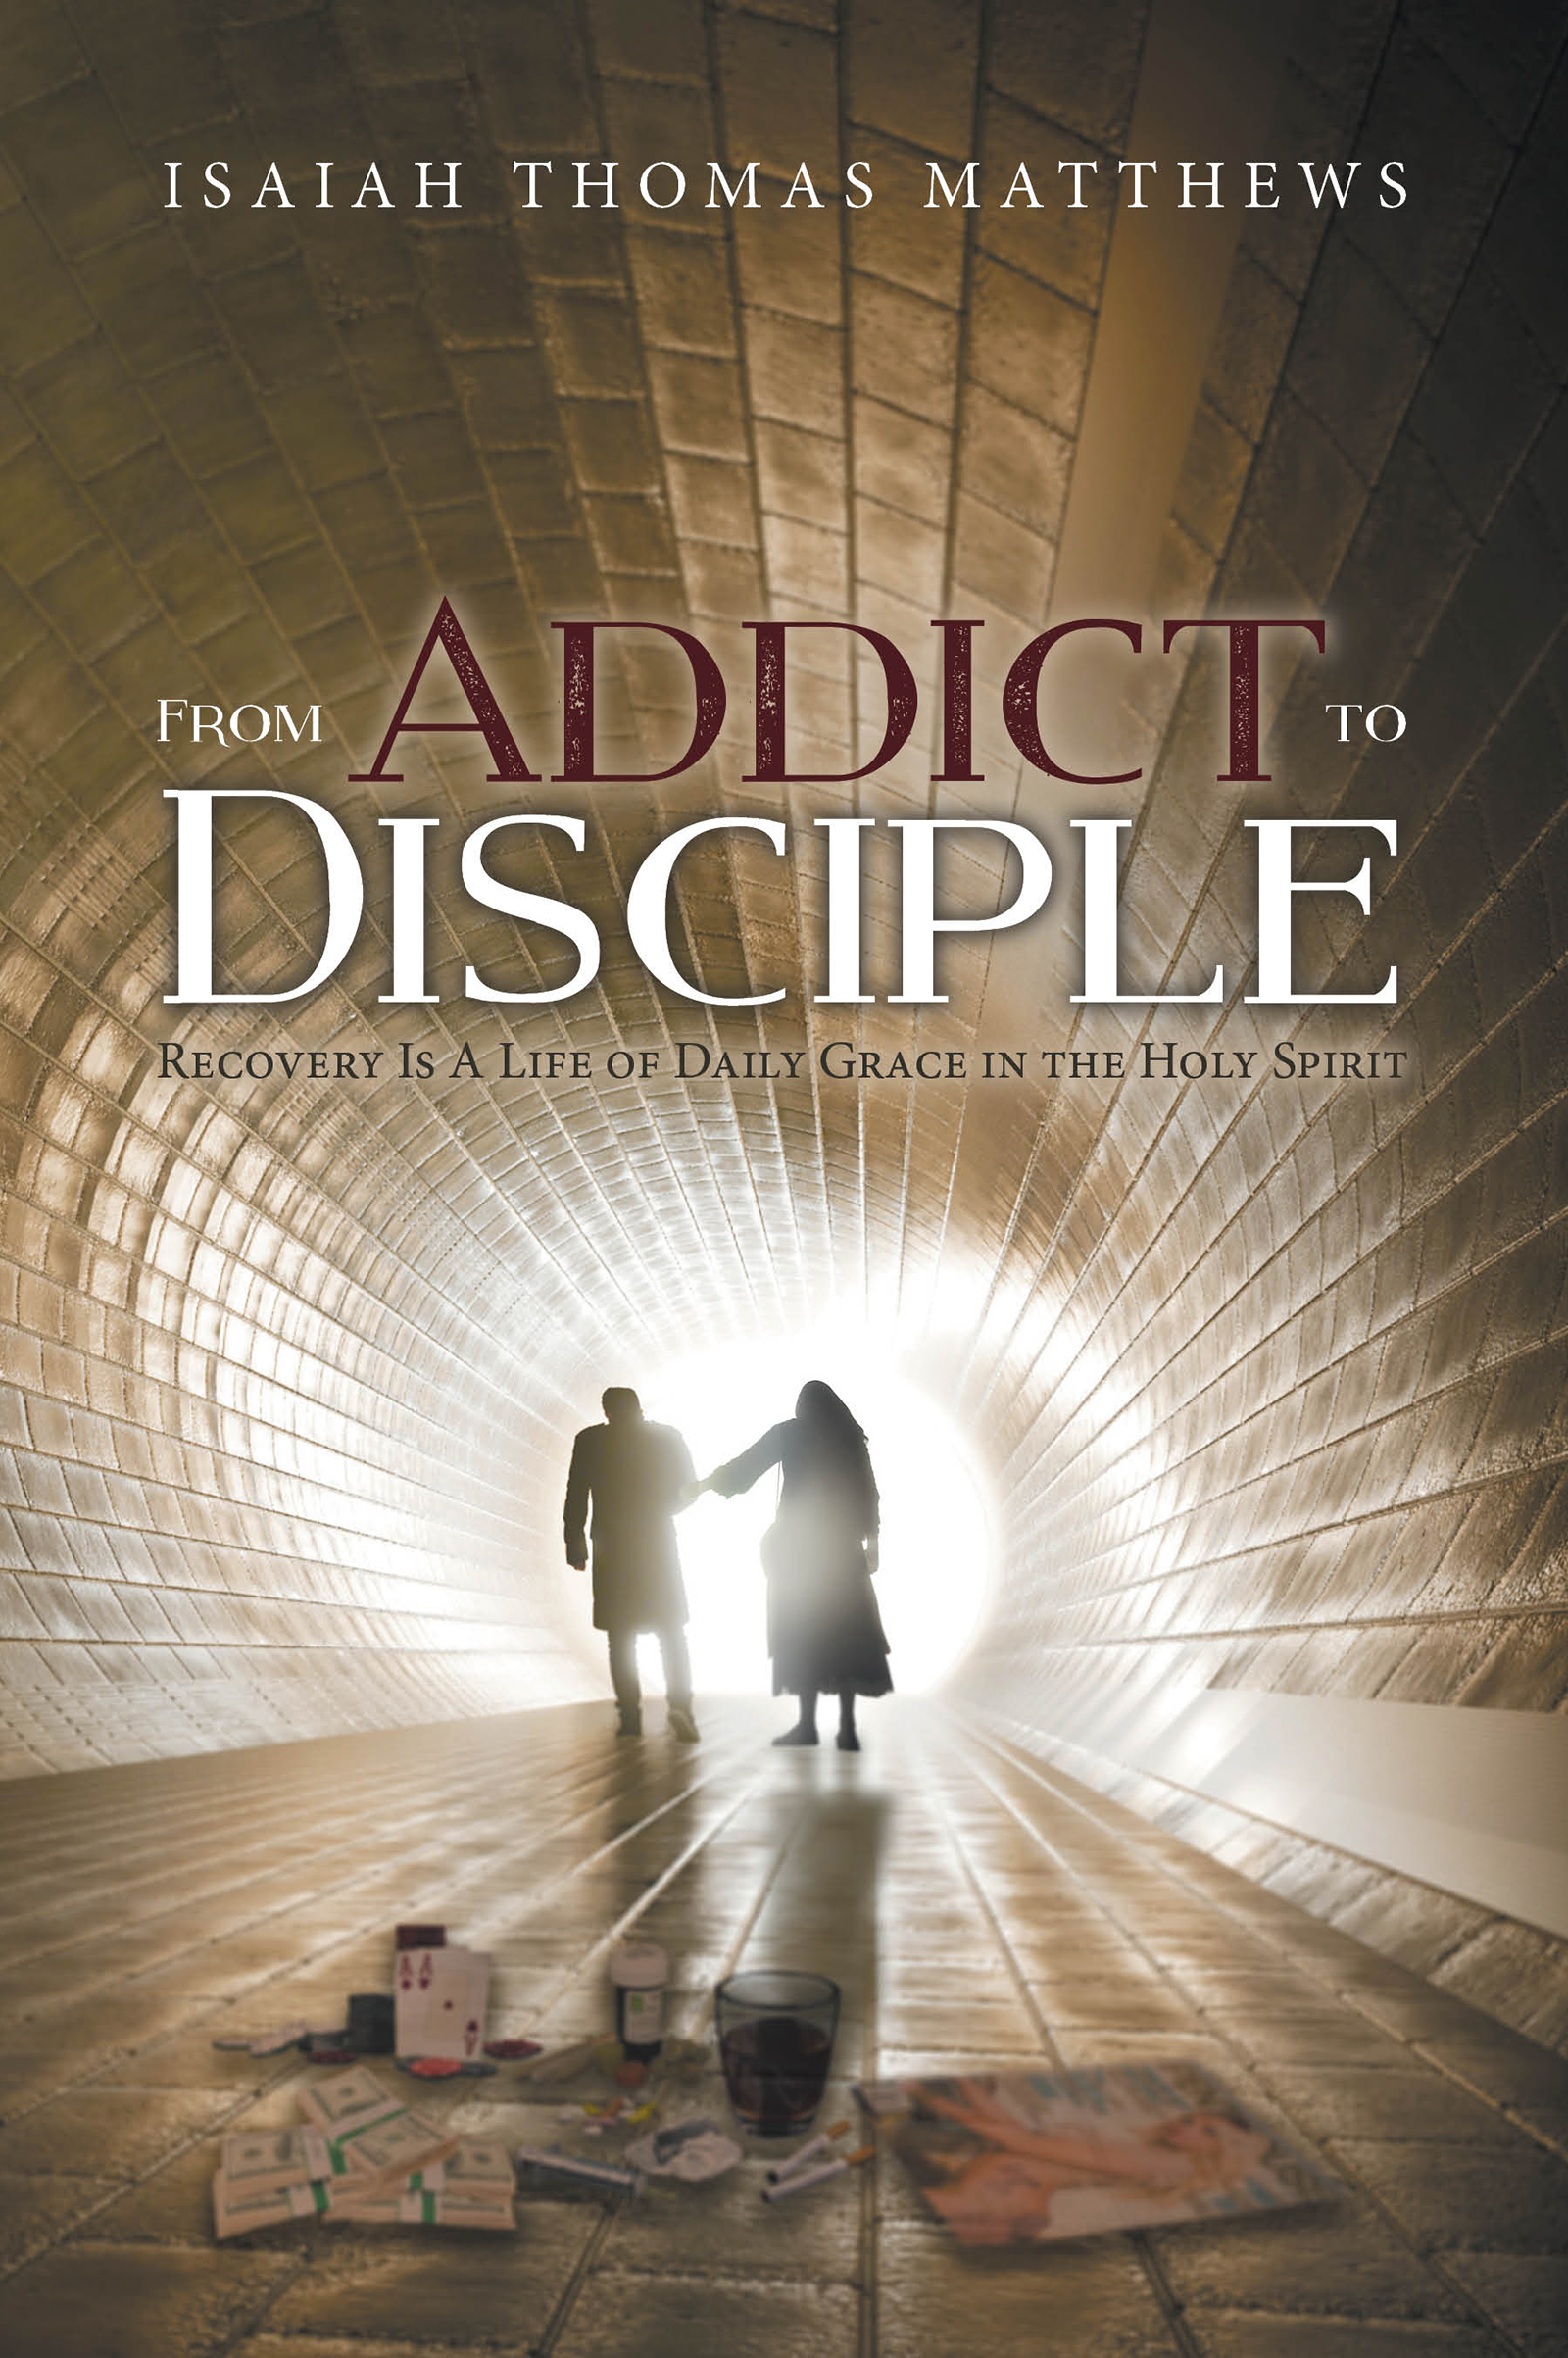 From Addict to Disciple by Author Isaiah Thomas Matthews